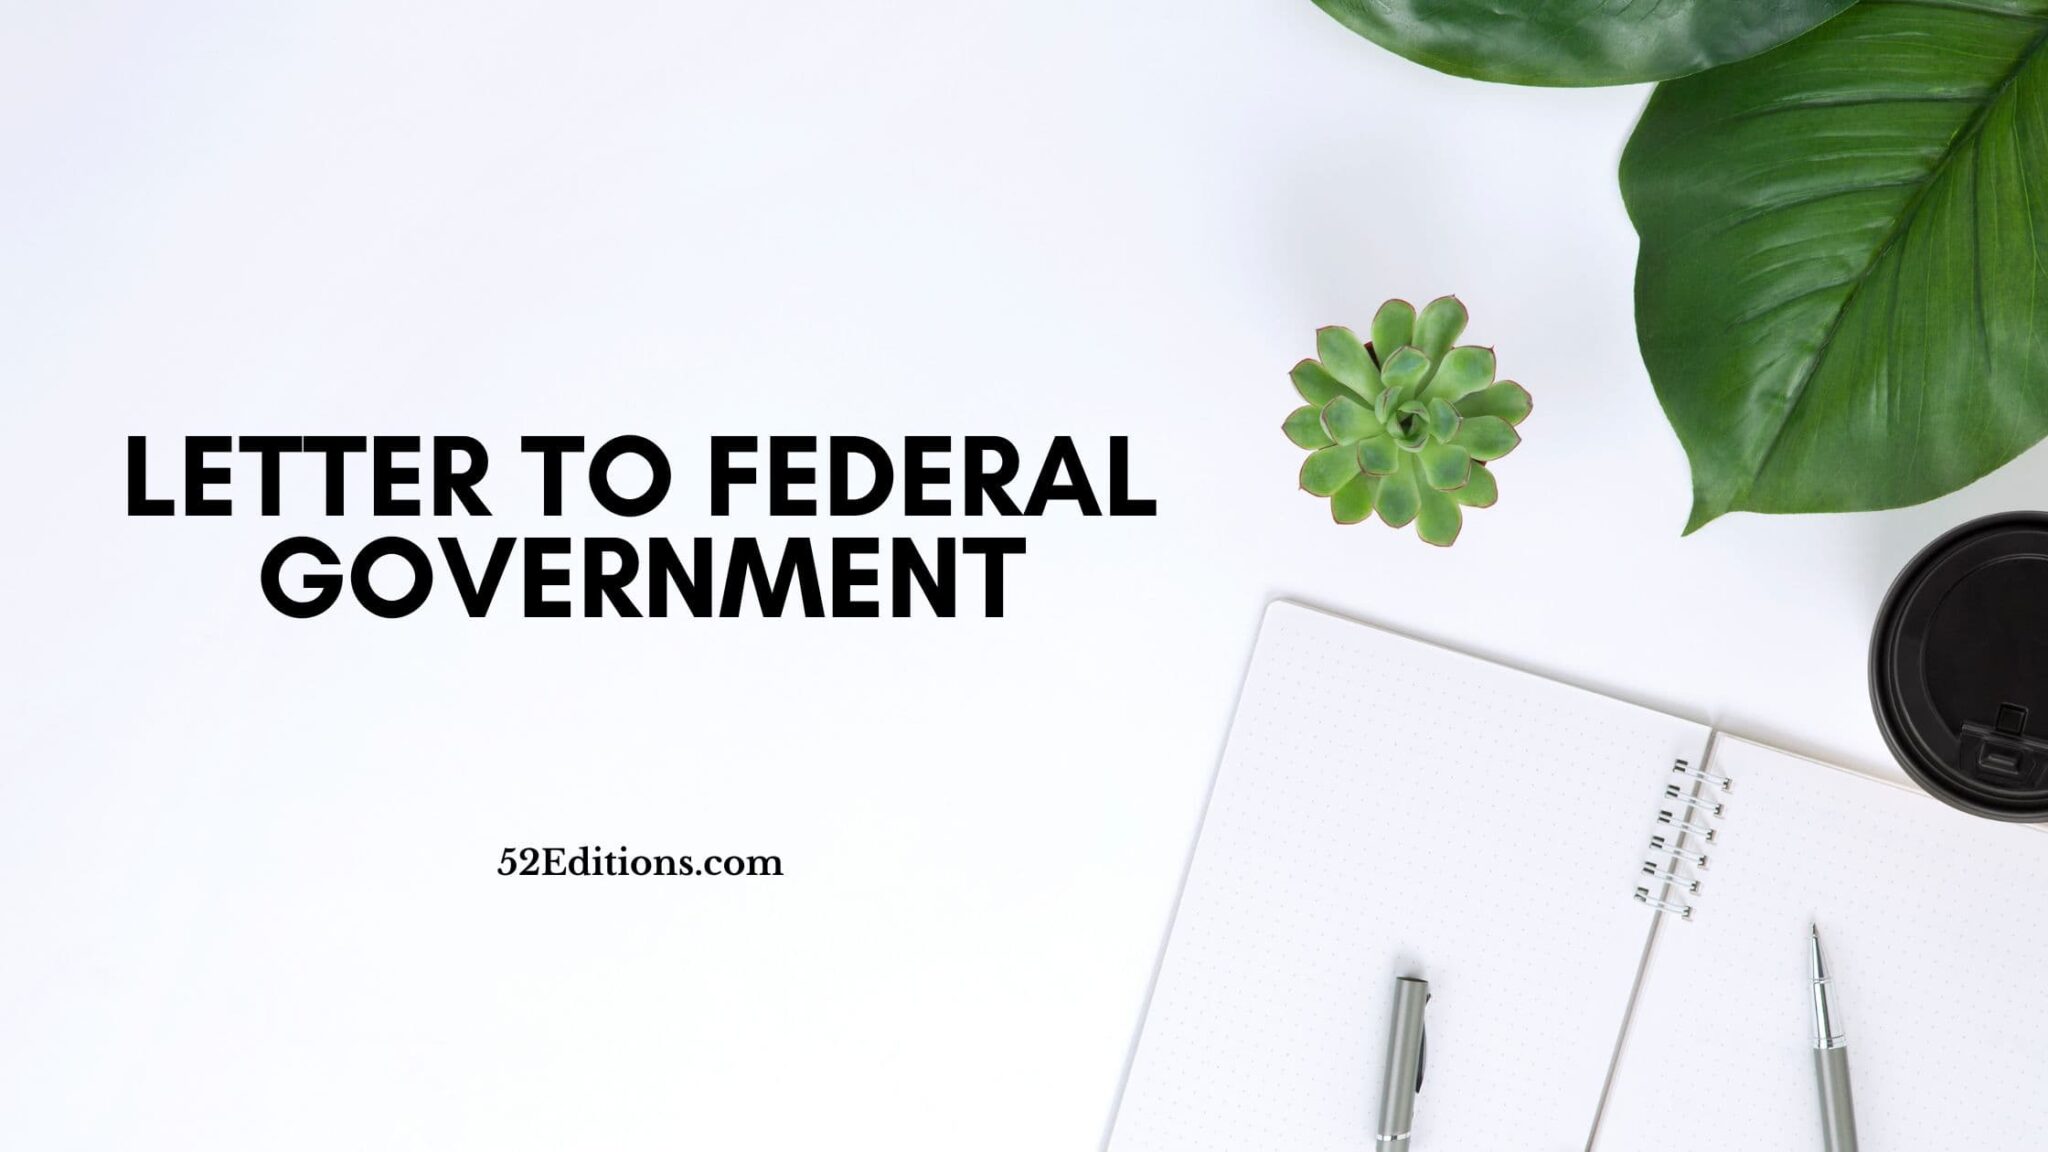 letter-to-federal-government-get-free-letter-templates-print-or